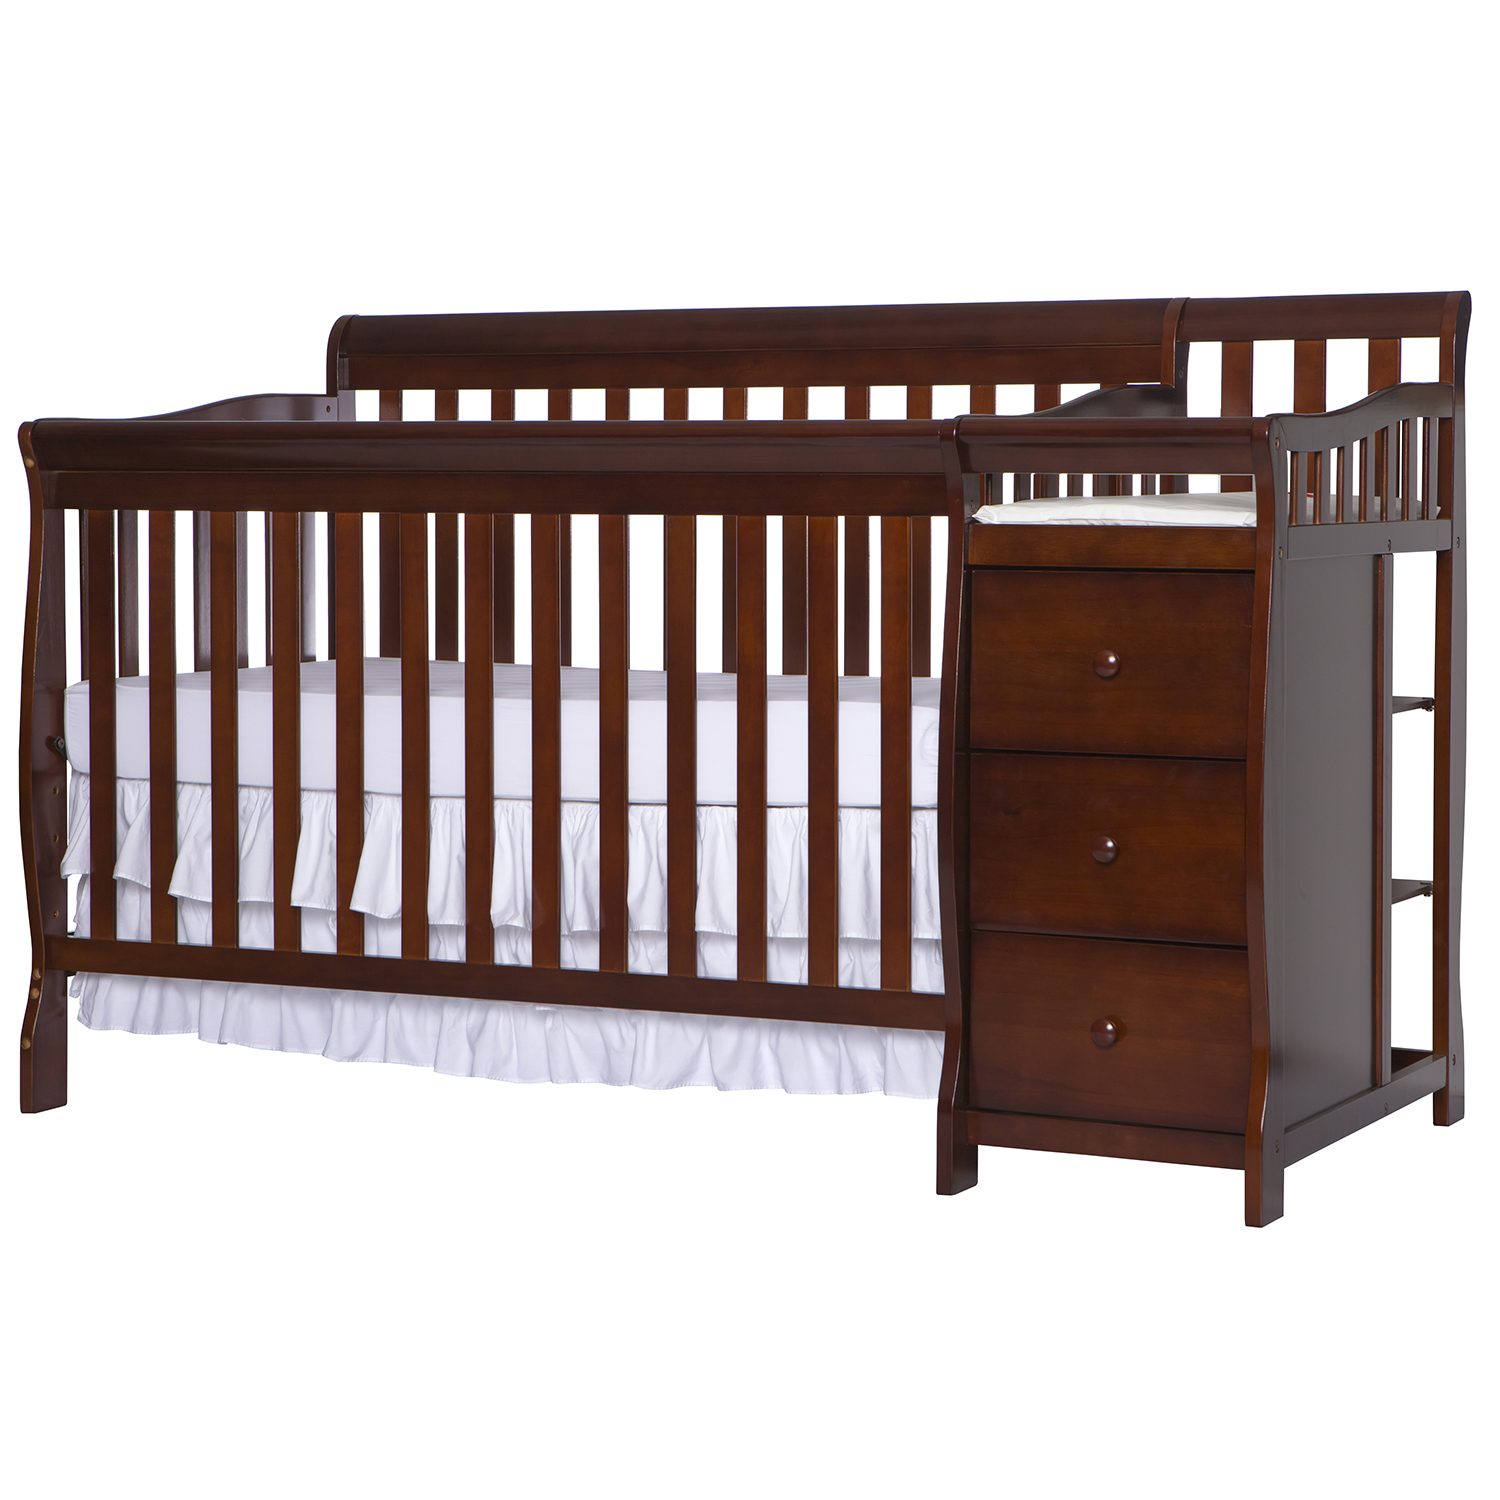 vermont tubbs bunk bed assembly instructions